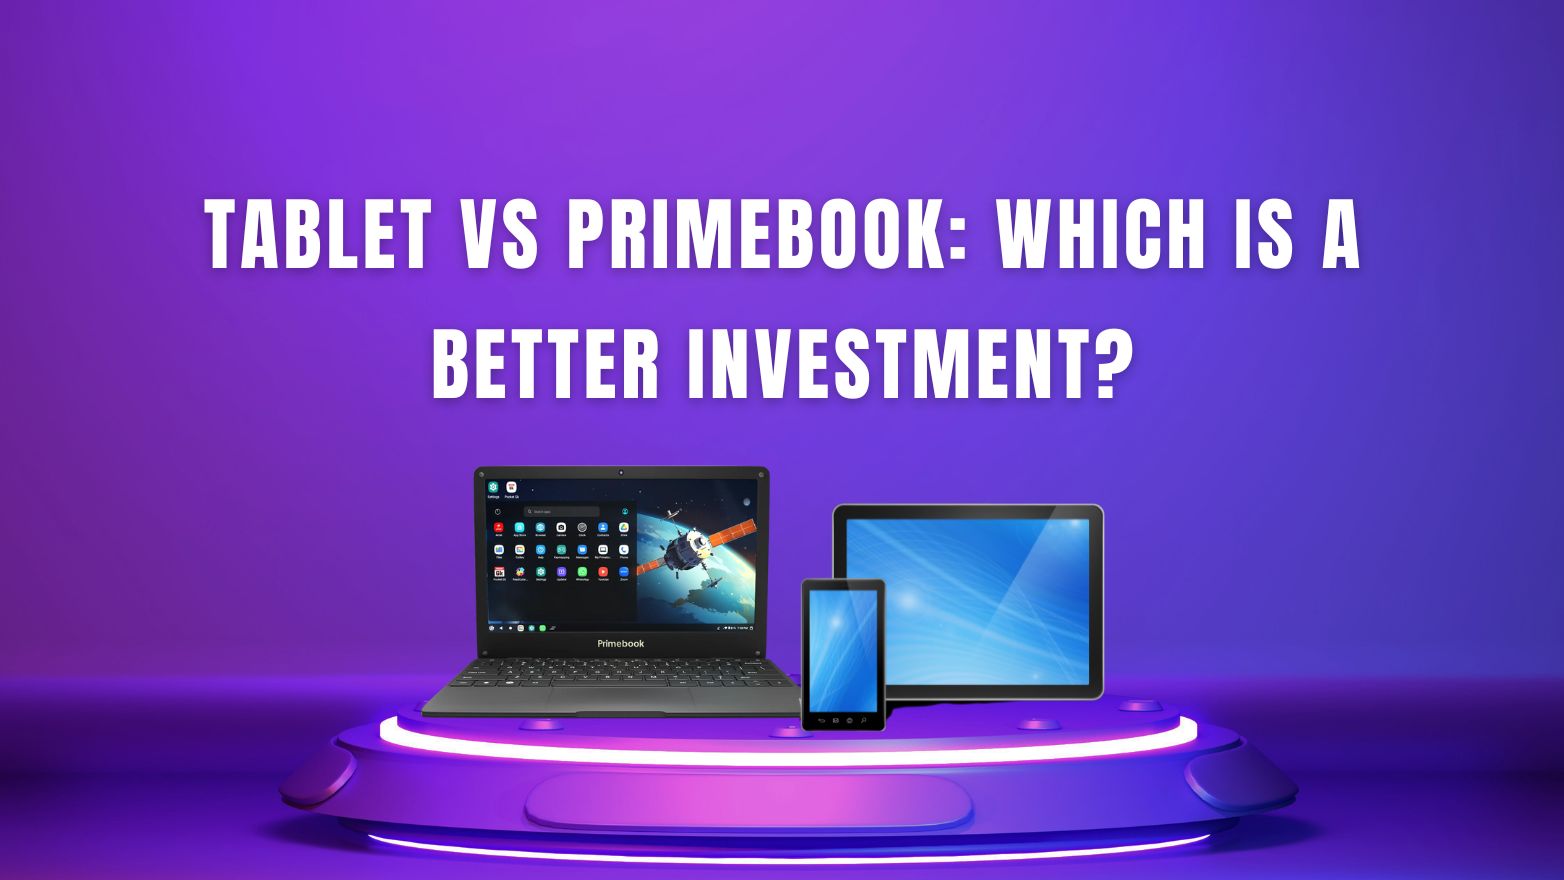 Tablet vs Primebook: Which is a better investment?